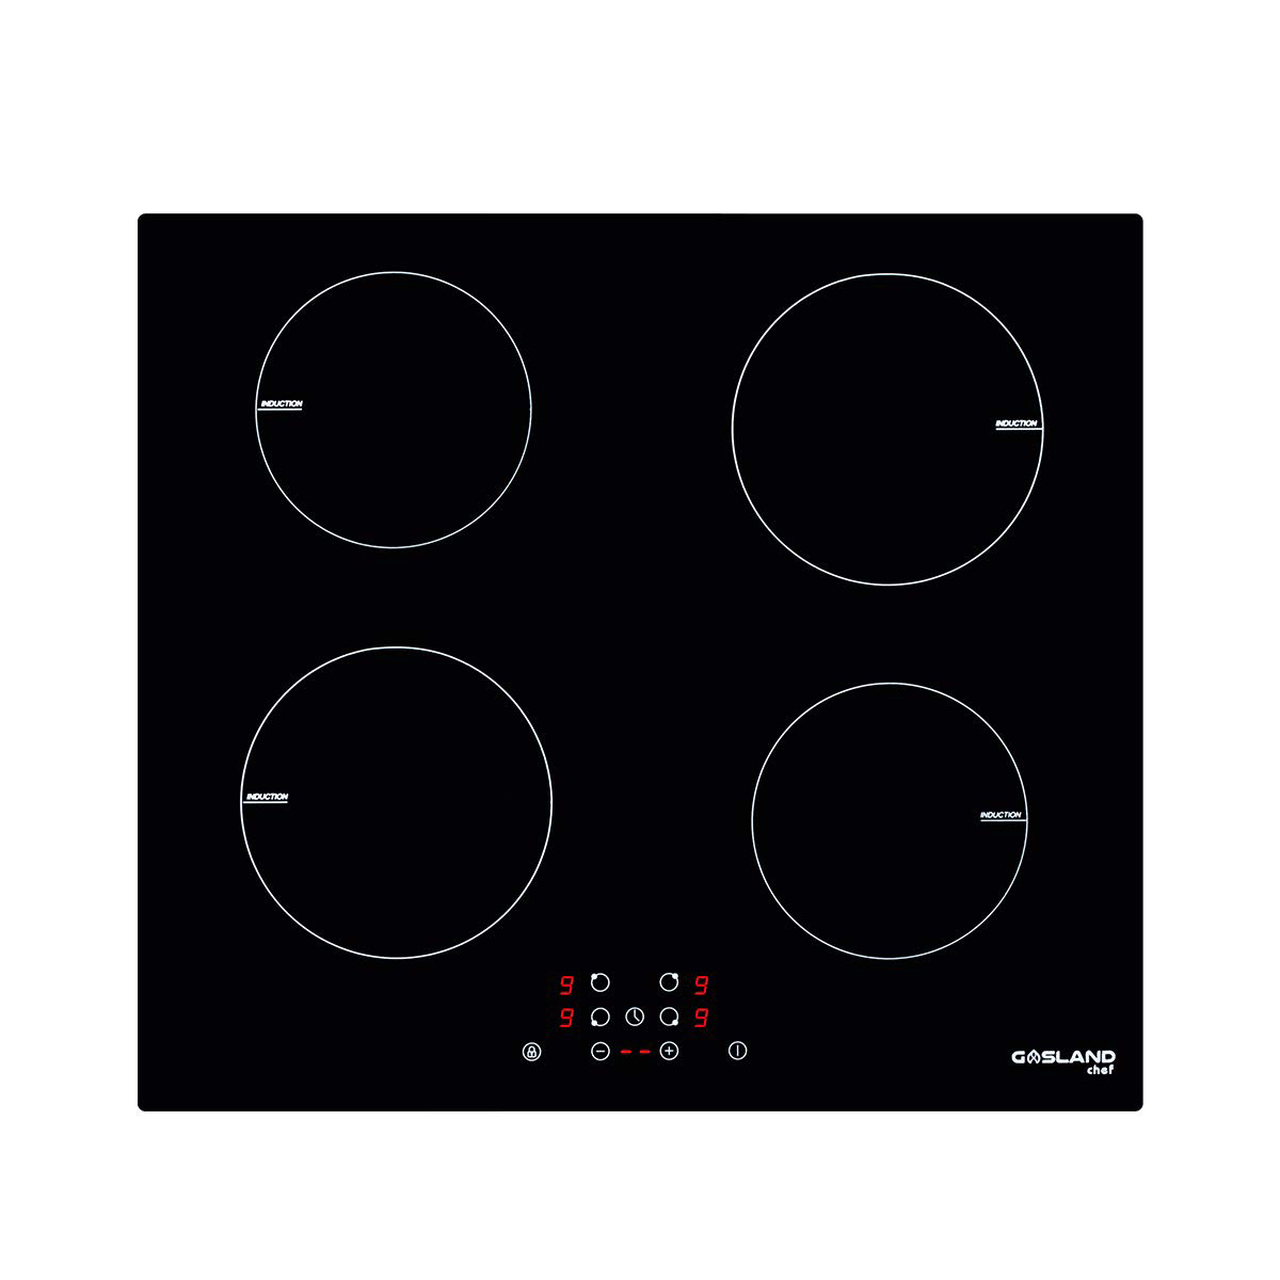 Detail Images Of Electric Stove Nomer 8